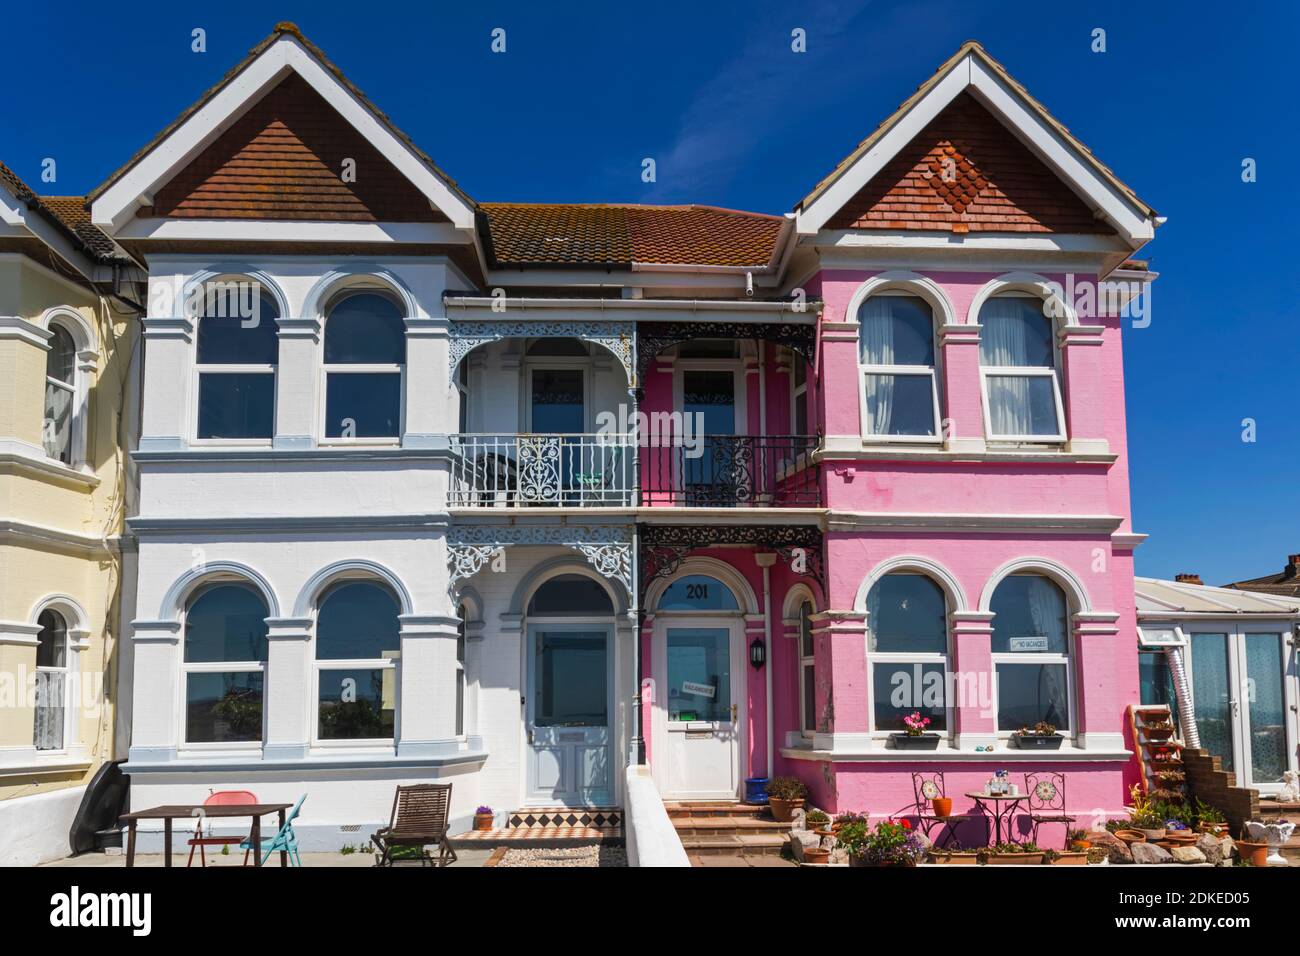 England, West Sussex, Worthing, bunte Seafront Bed and Breakfast Unterkunft Stockfoto